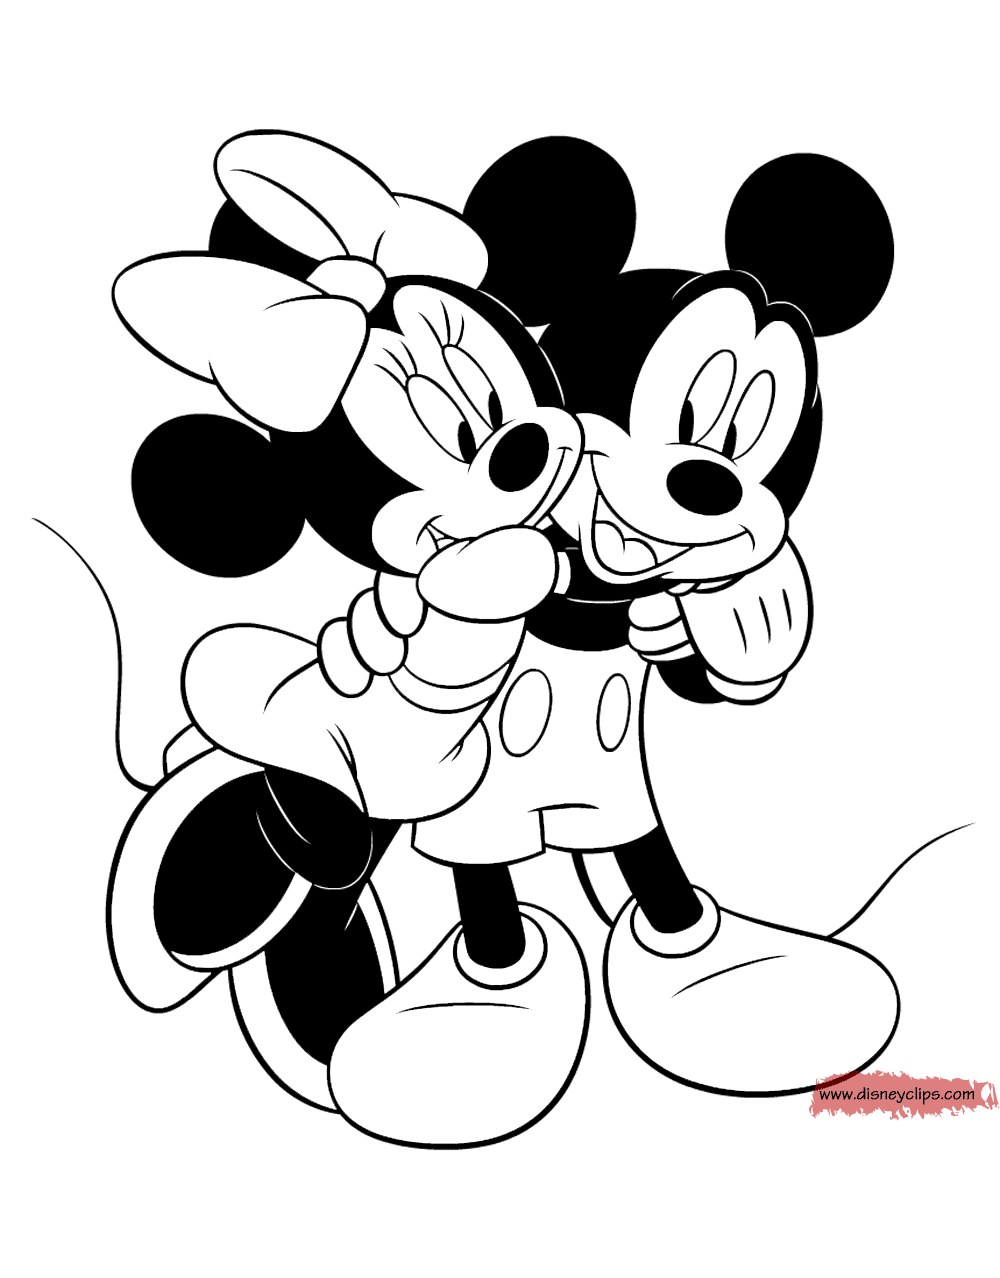 Mickey Mouse Friends Coloring Pages 2 Disney39s World